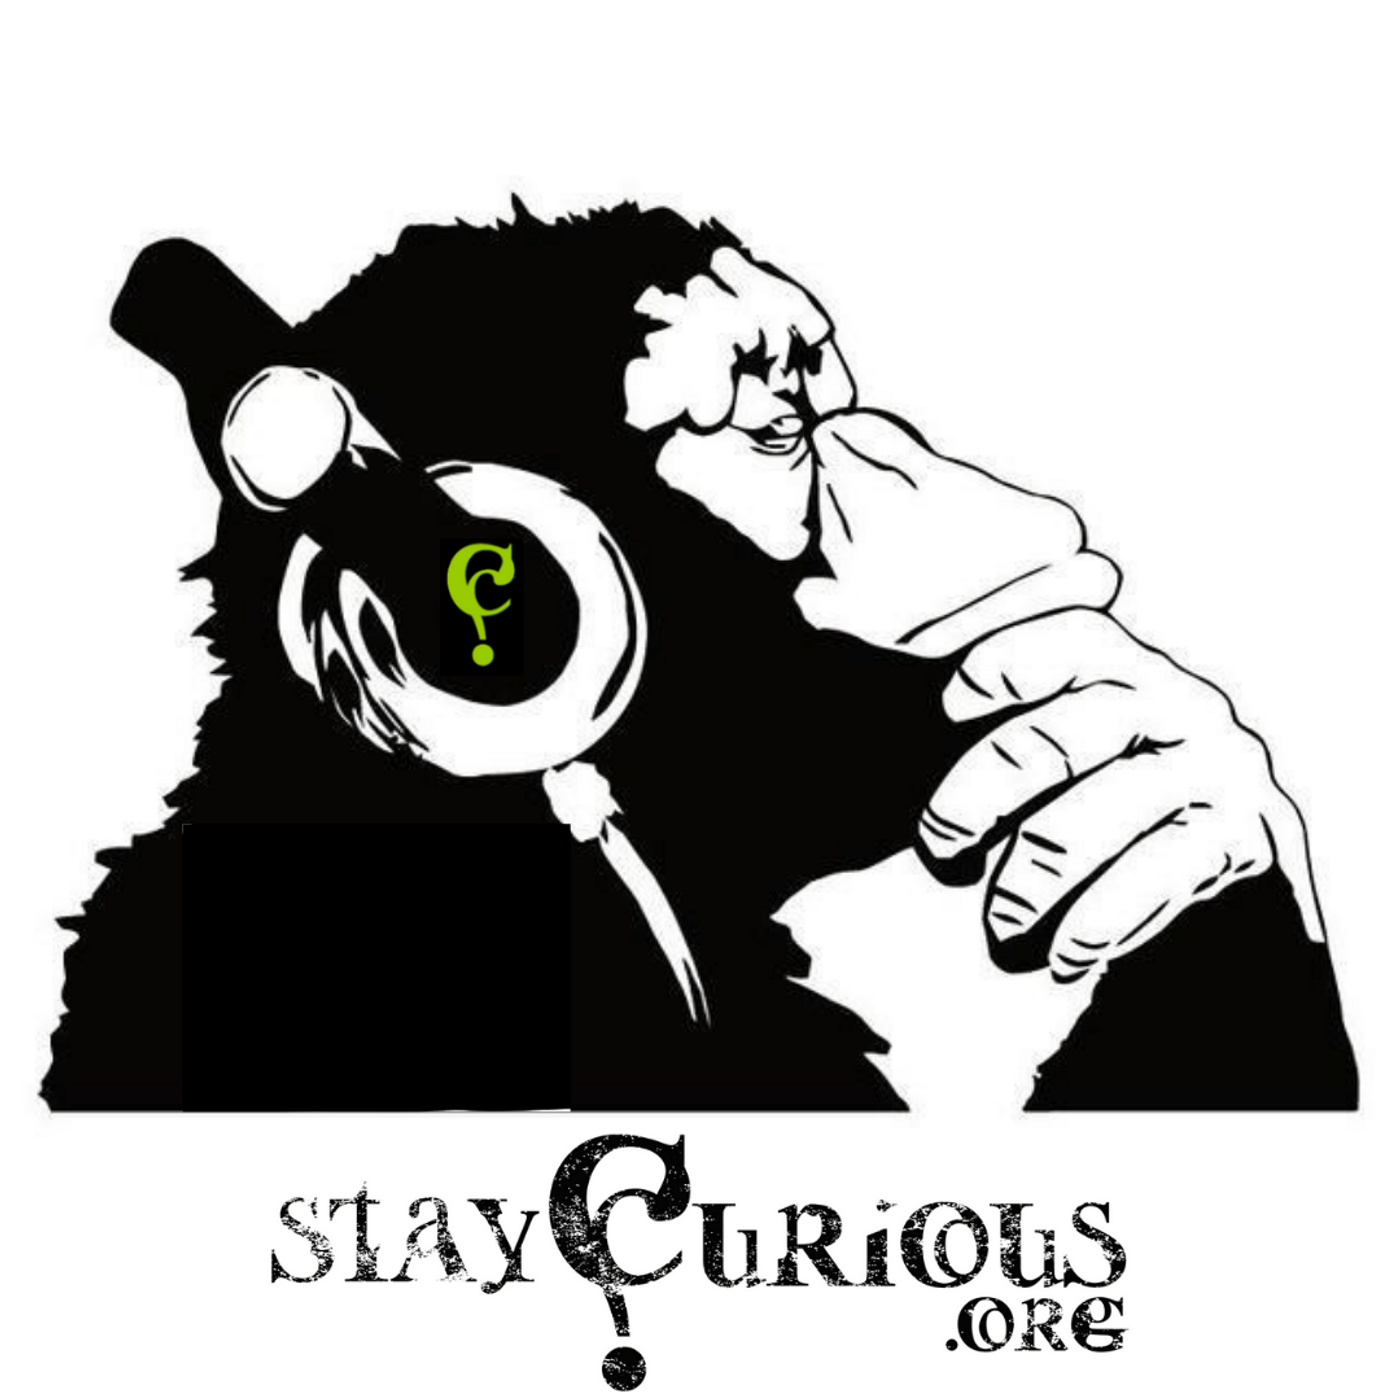 staycurious.org Presents: